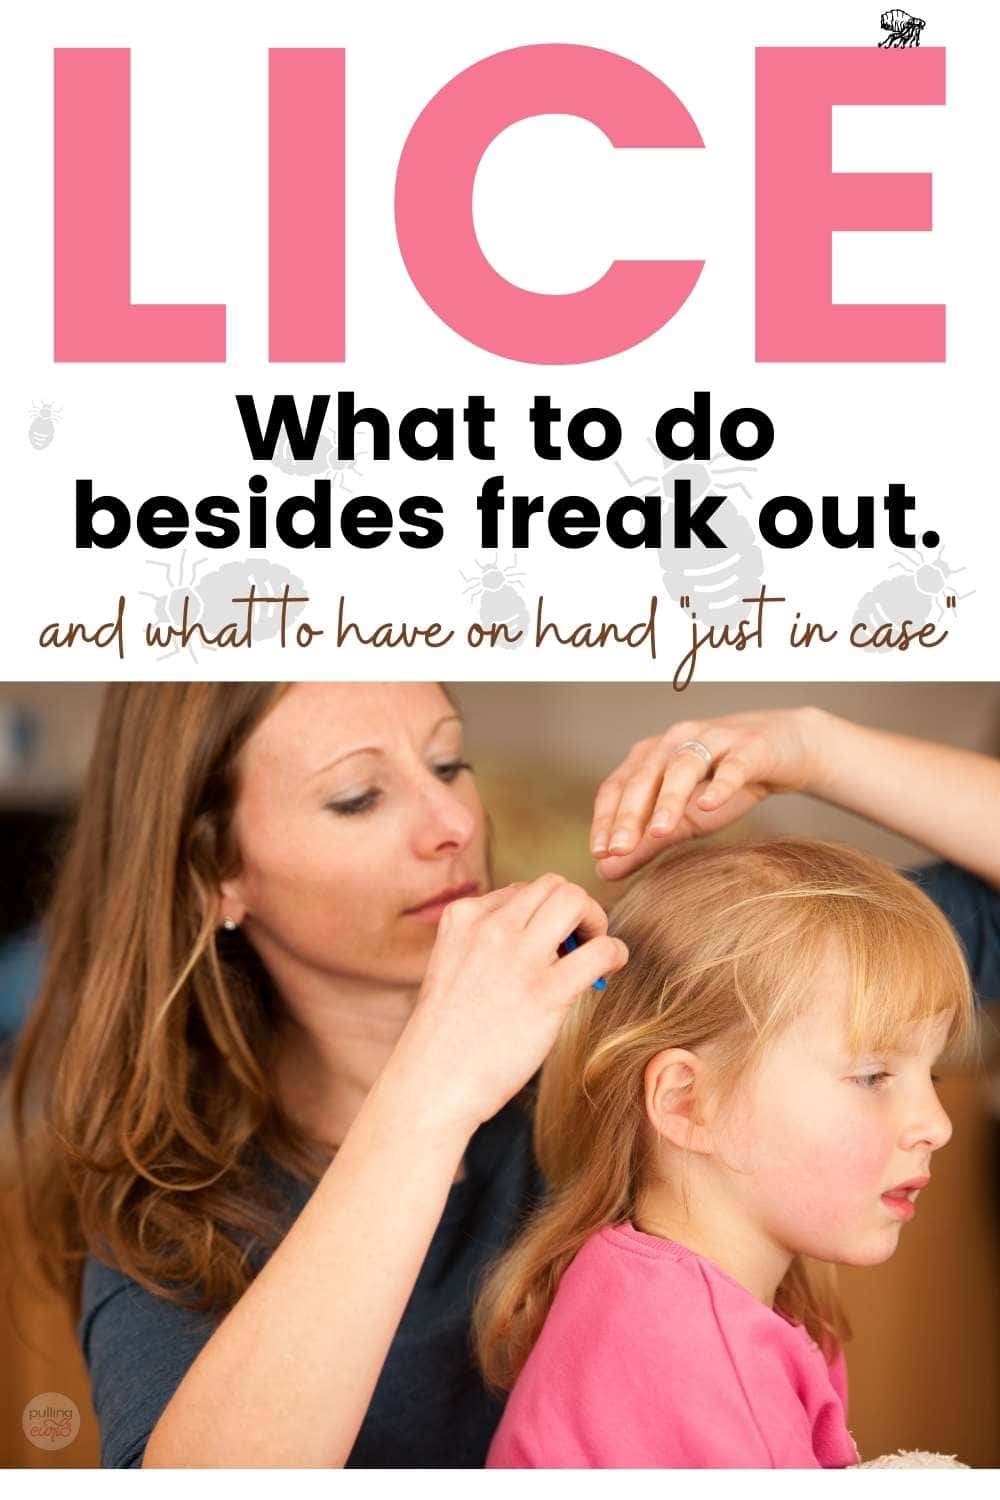 No need to go to the drugstore to get your head lice home remedies -- there's things you can do and items you can grab straight from your pantry that can help you stop lice in their tracks. via @pullingcurls